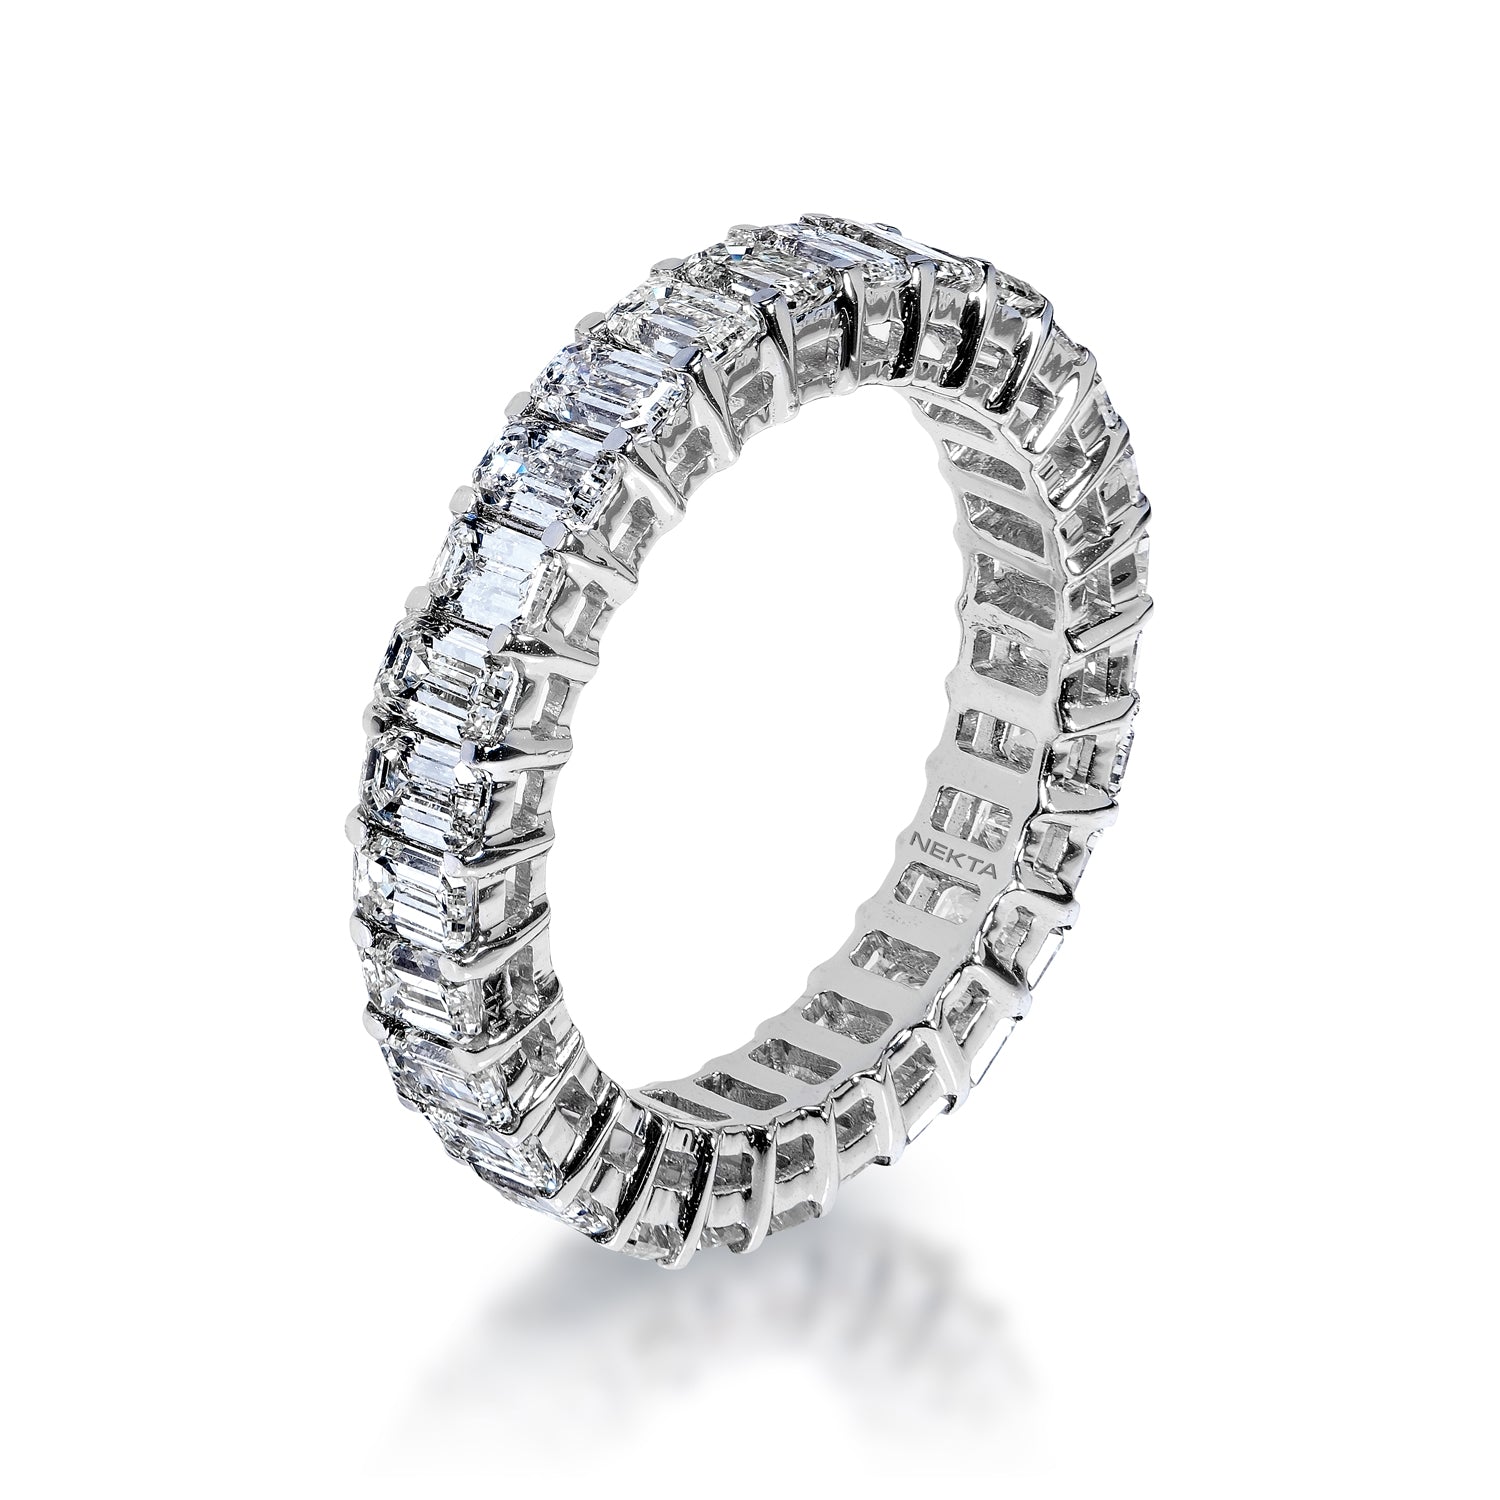 Rylie 4 Carat Emerald Cut Diamond Eternity Ring in 14k White Gold Shared Prong Side View